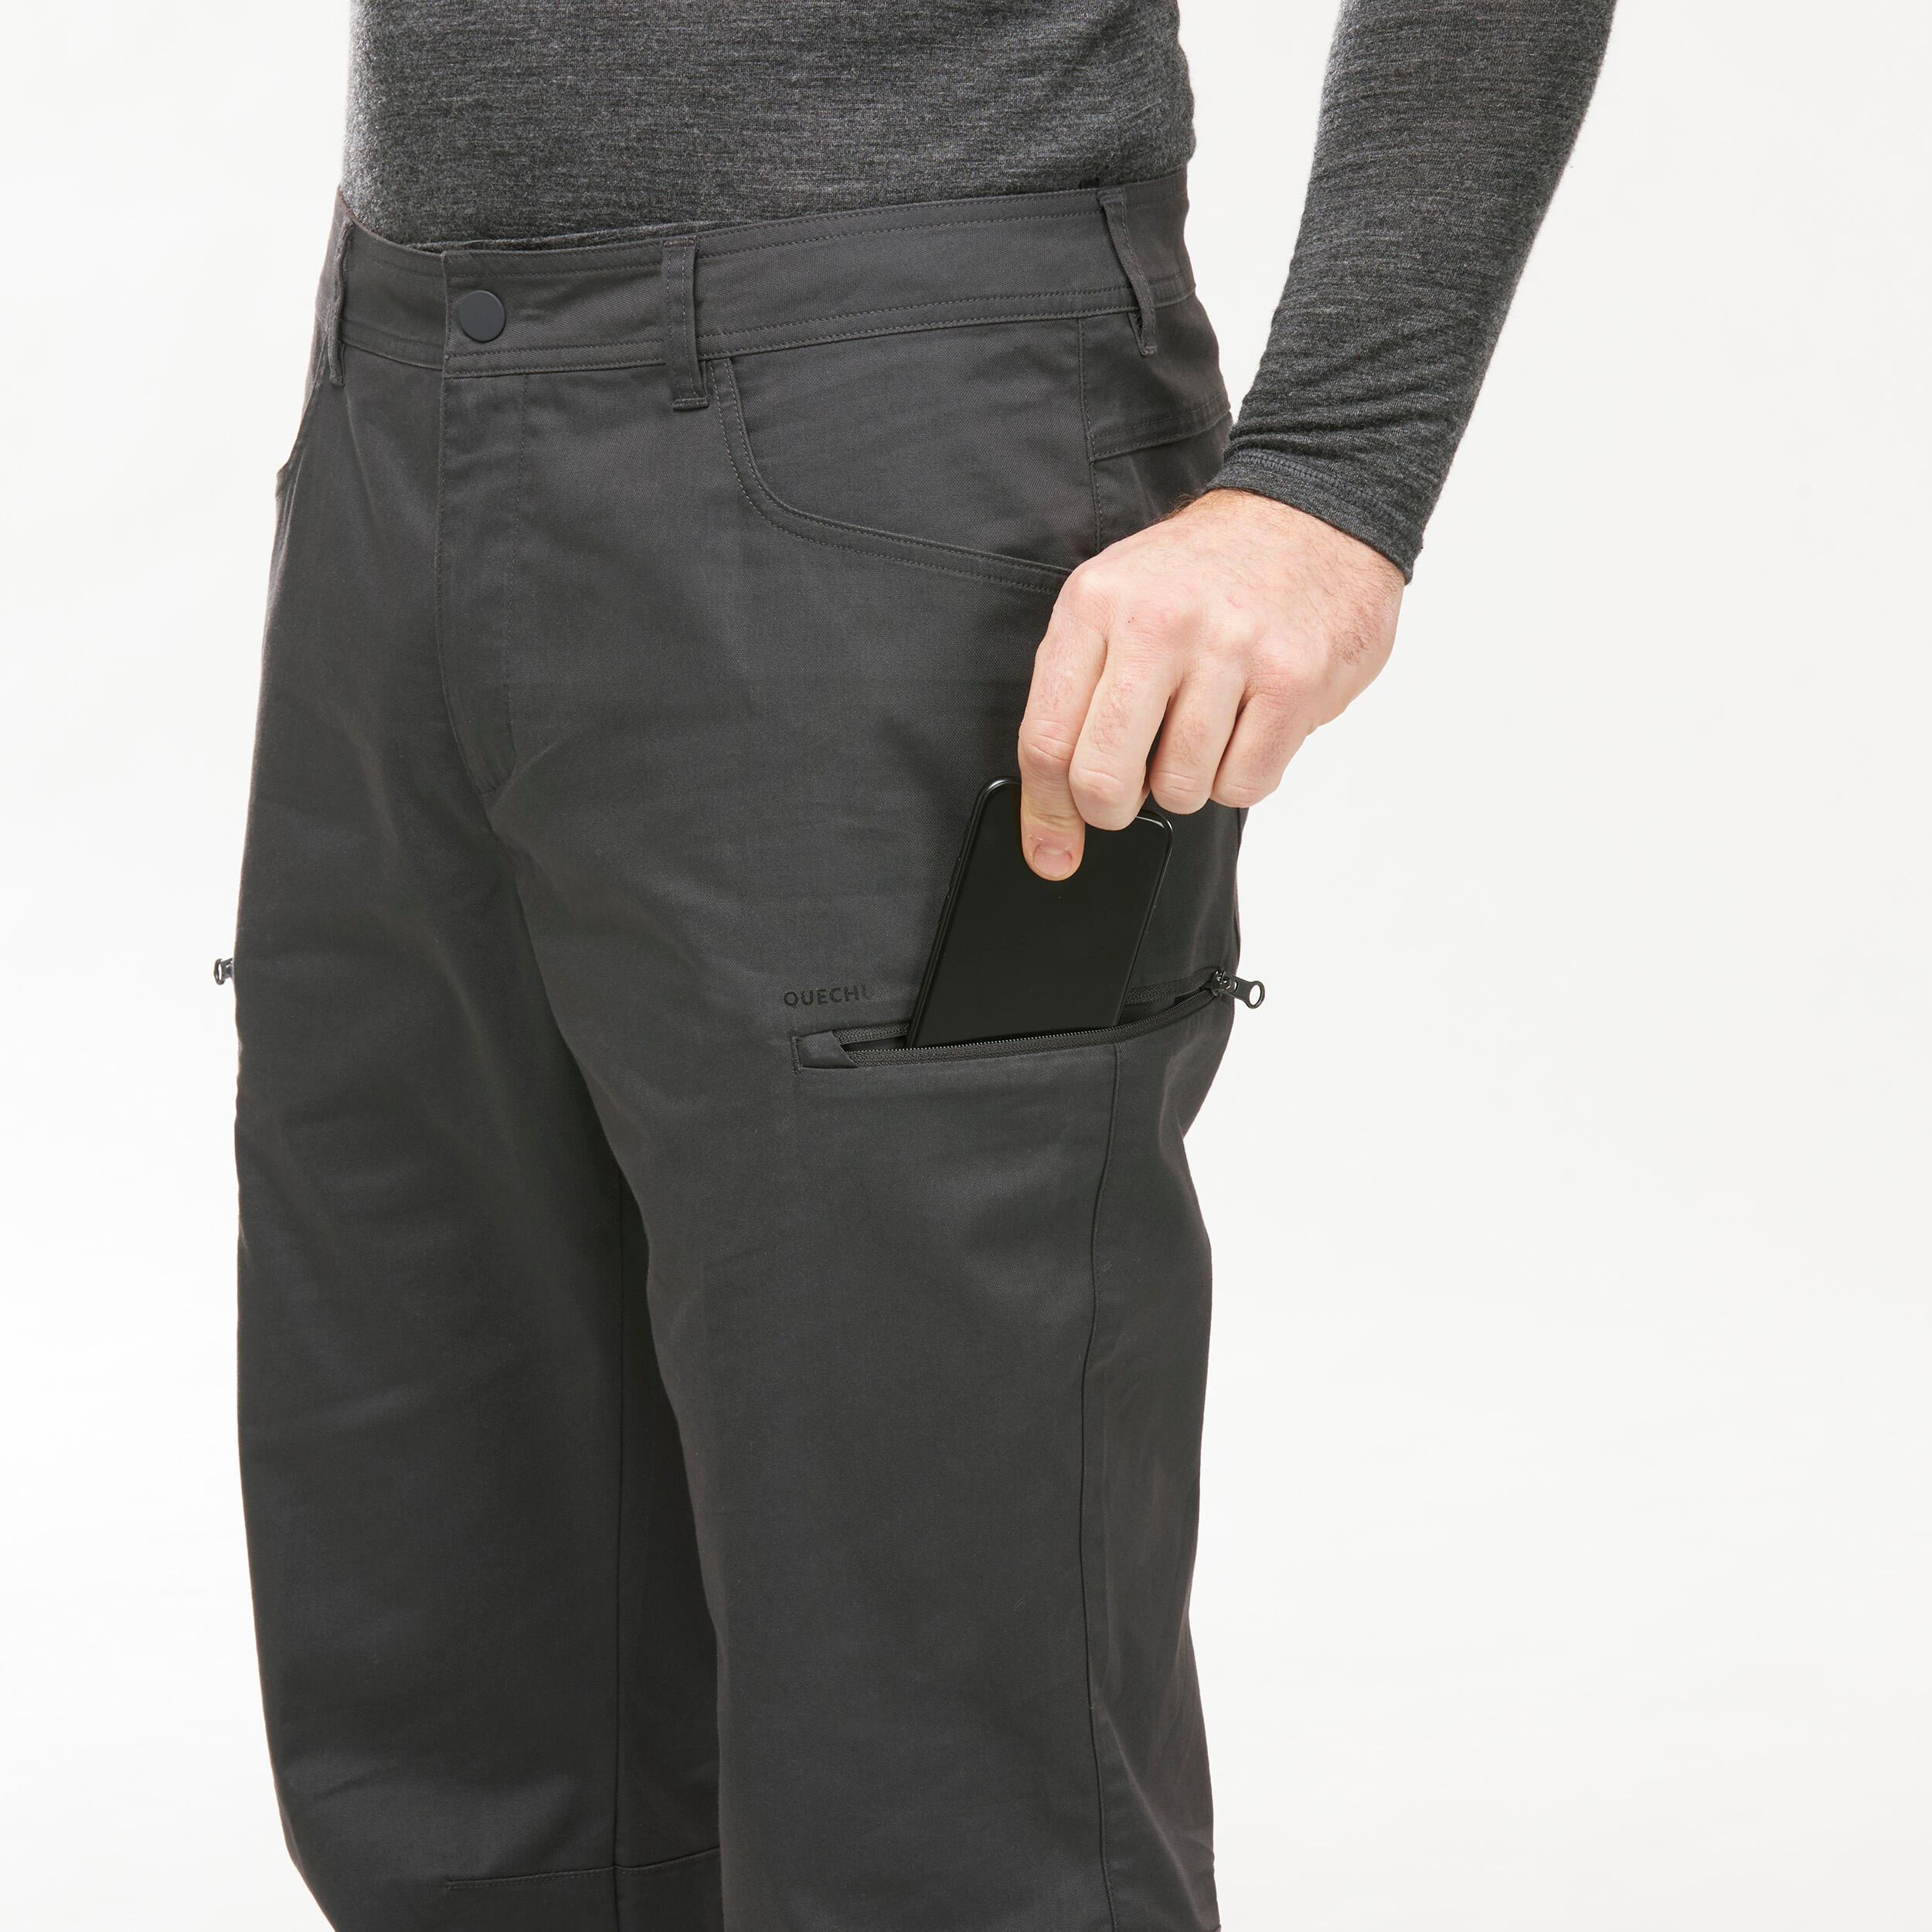 Decathlon official soft shell pants men's outdoor winter and